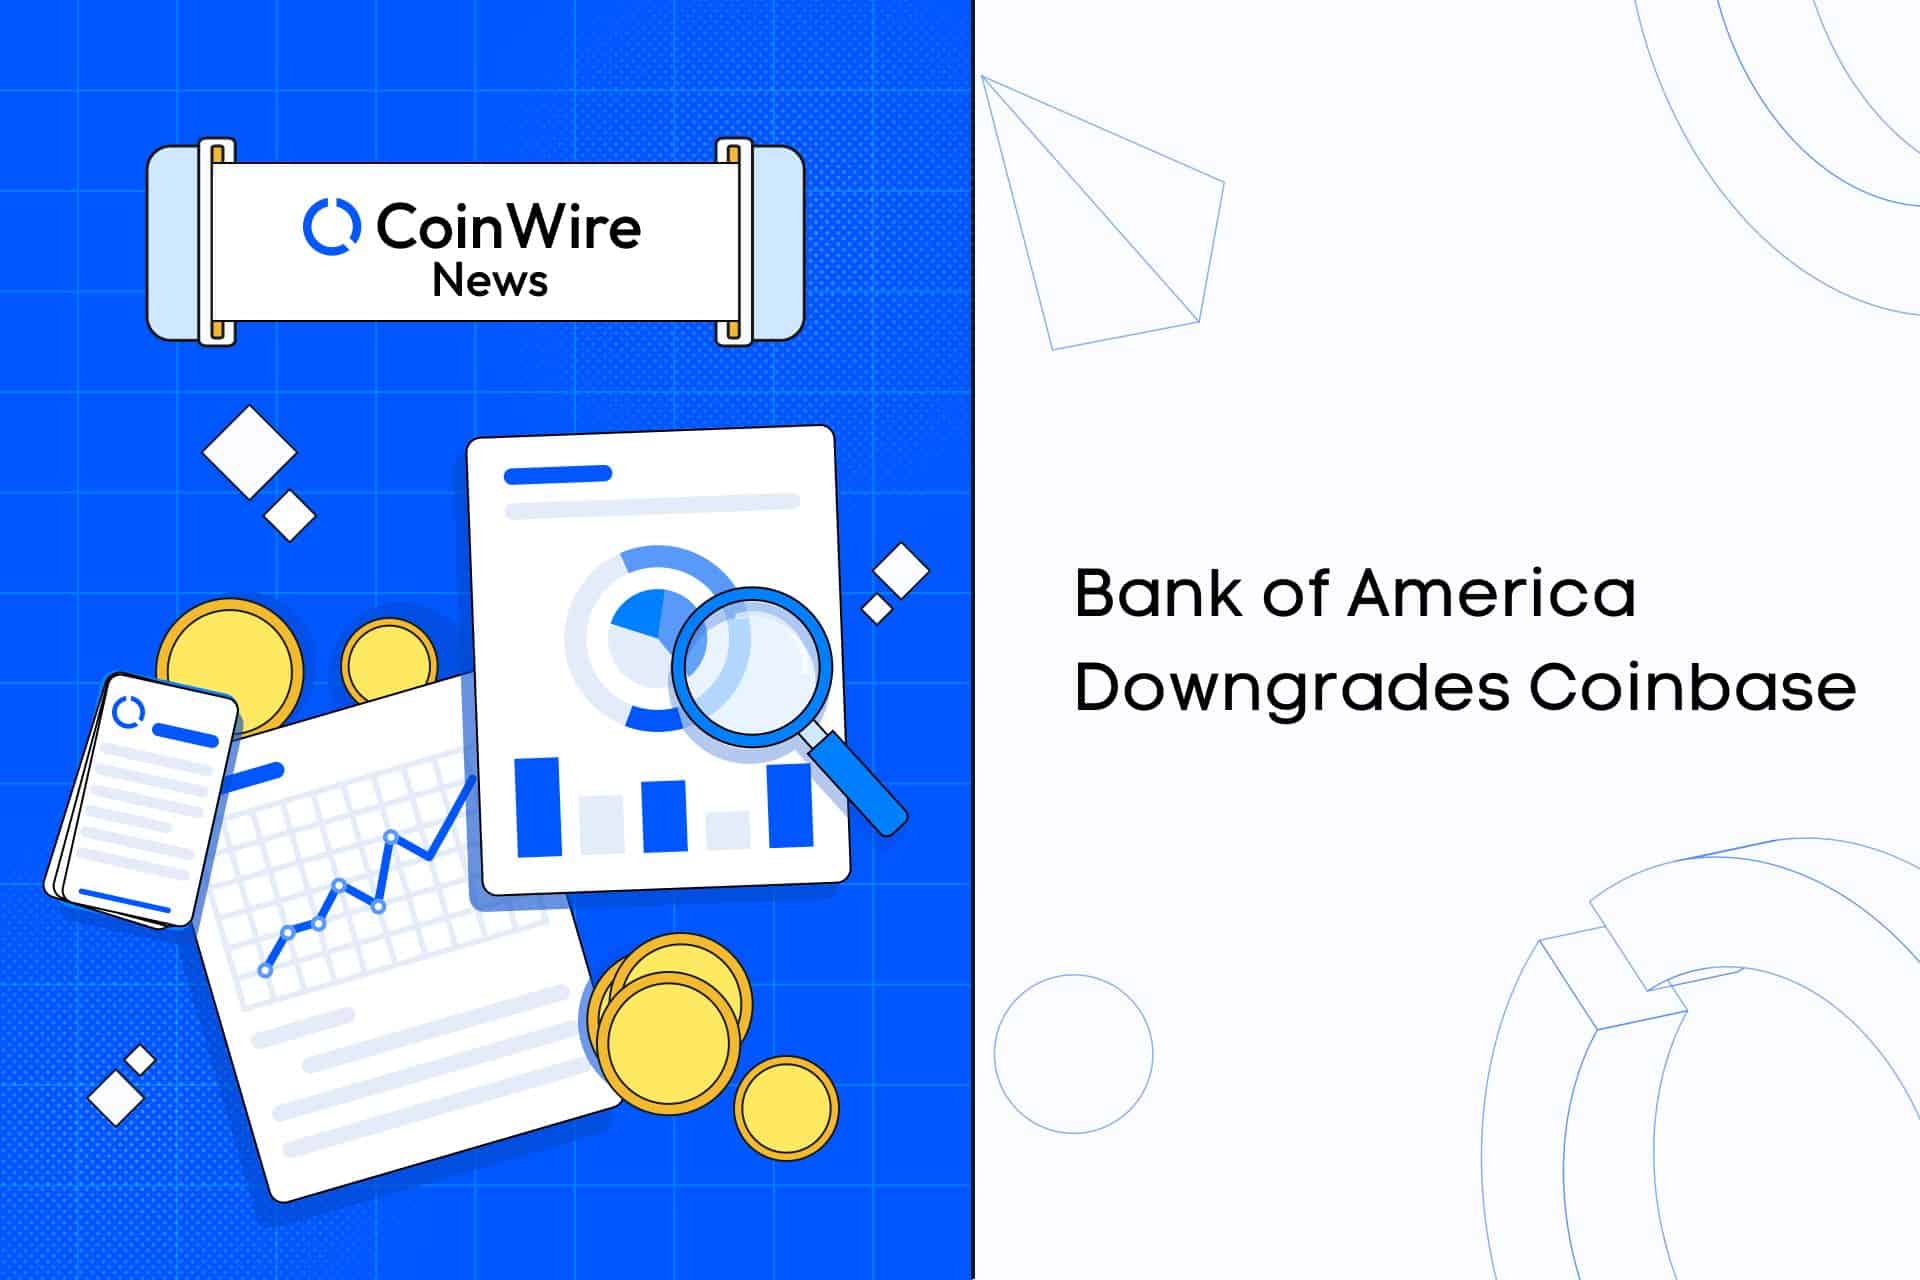 Bank Of America Downgrades Coinbase Price Target To $50, Coin Fell By 7%